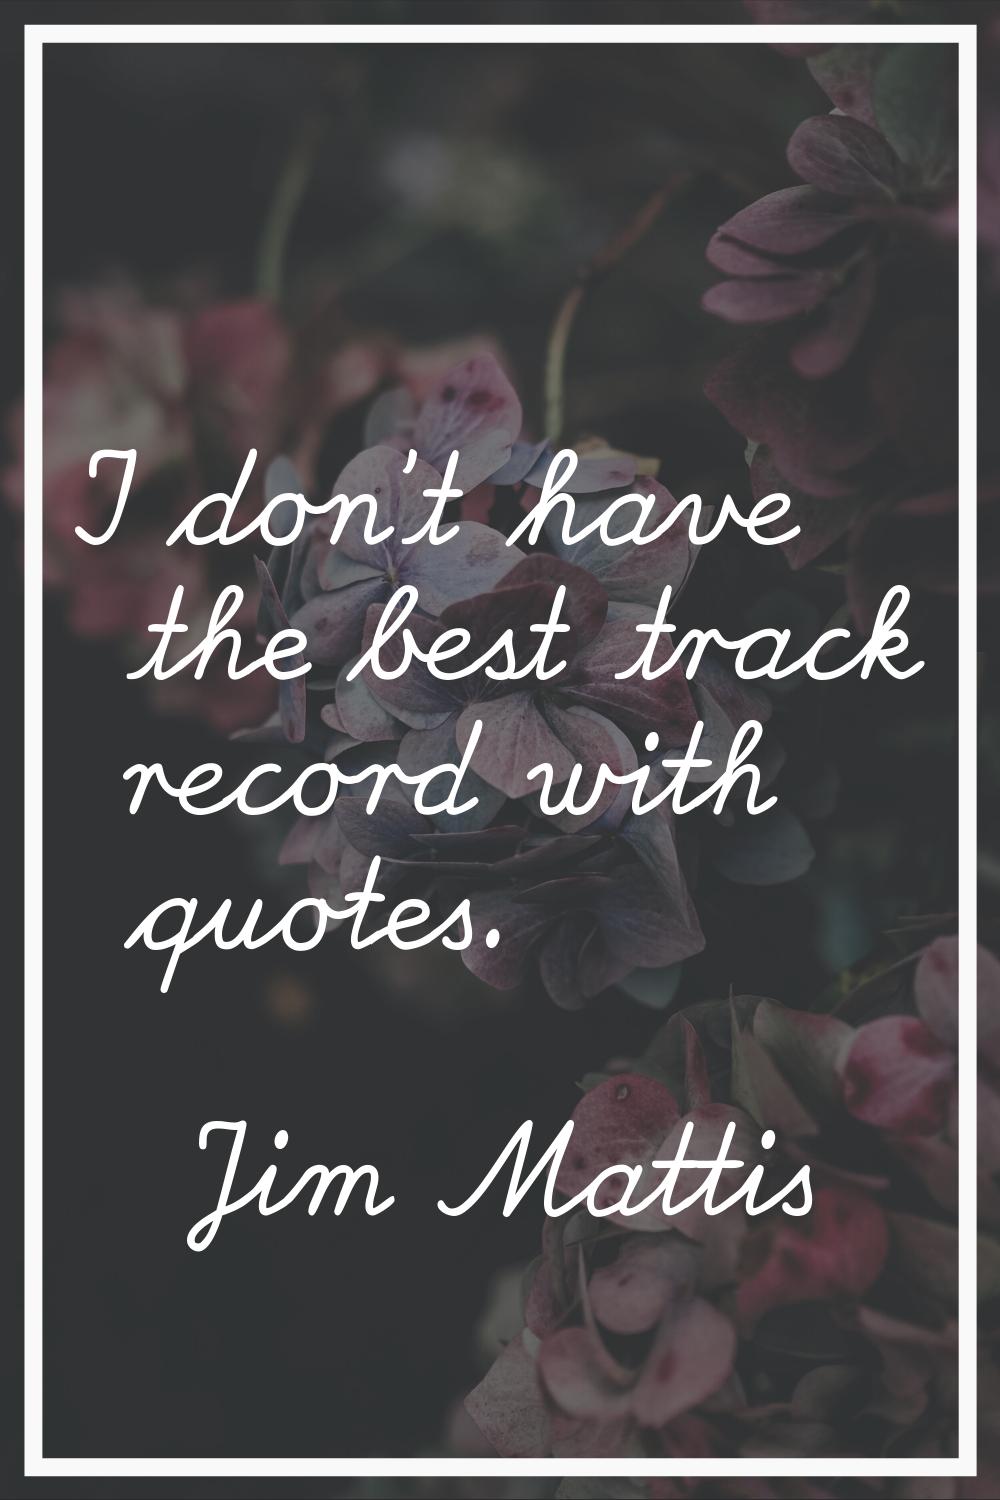 I don't have the best track record with quotes.